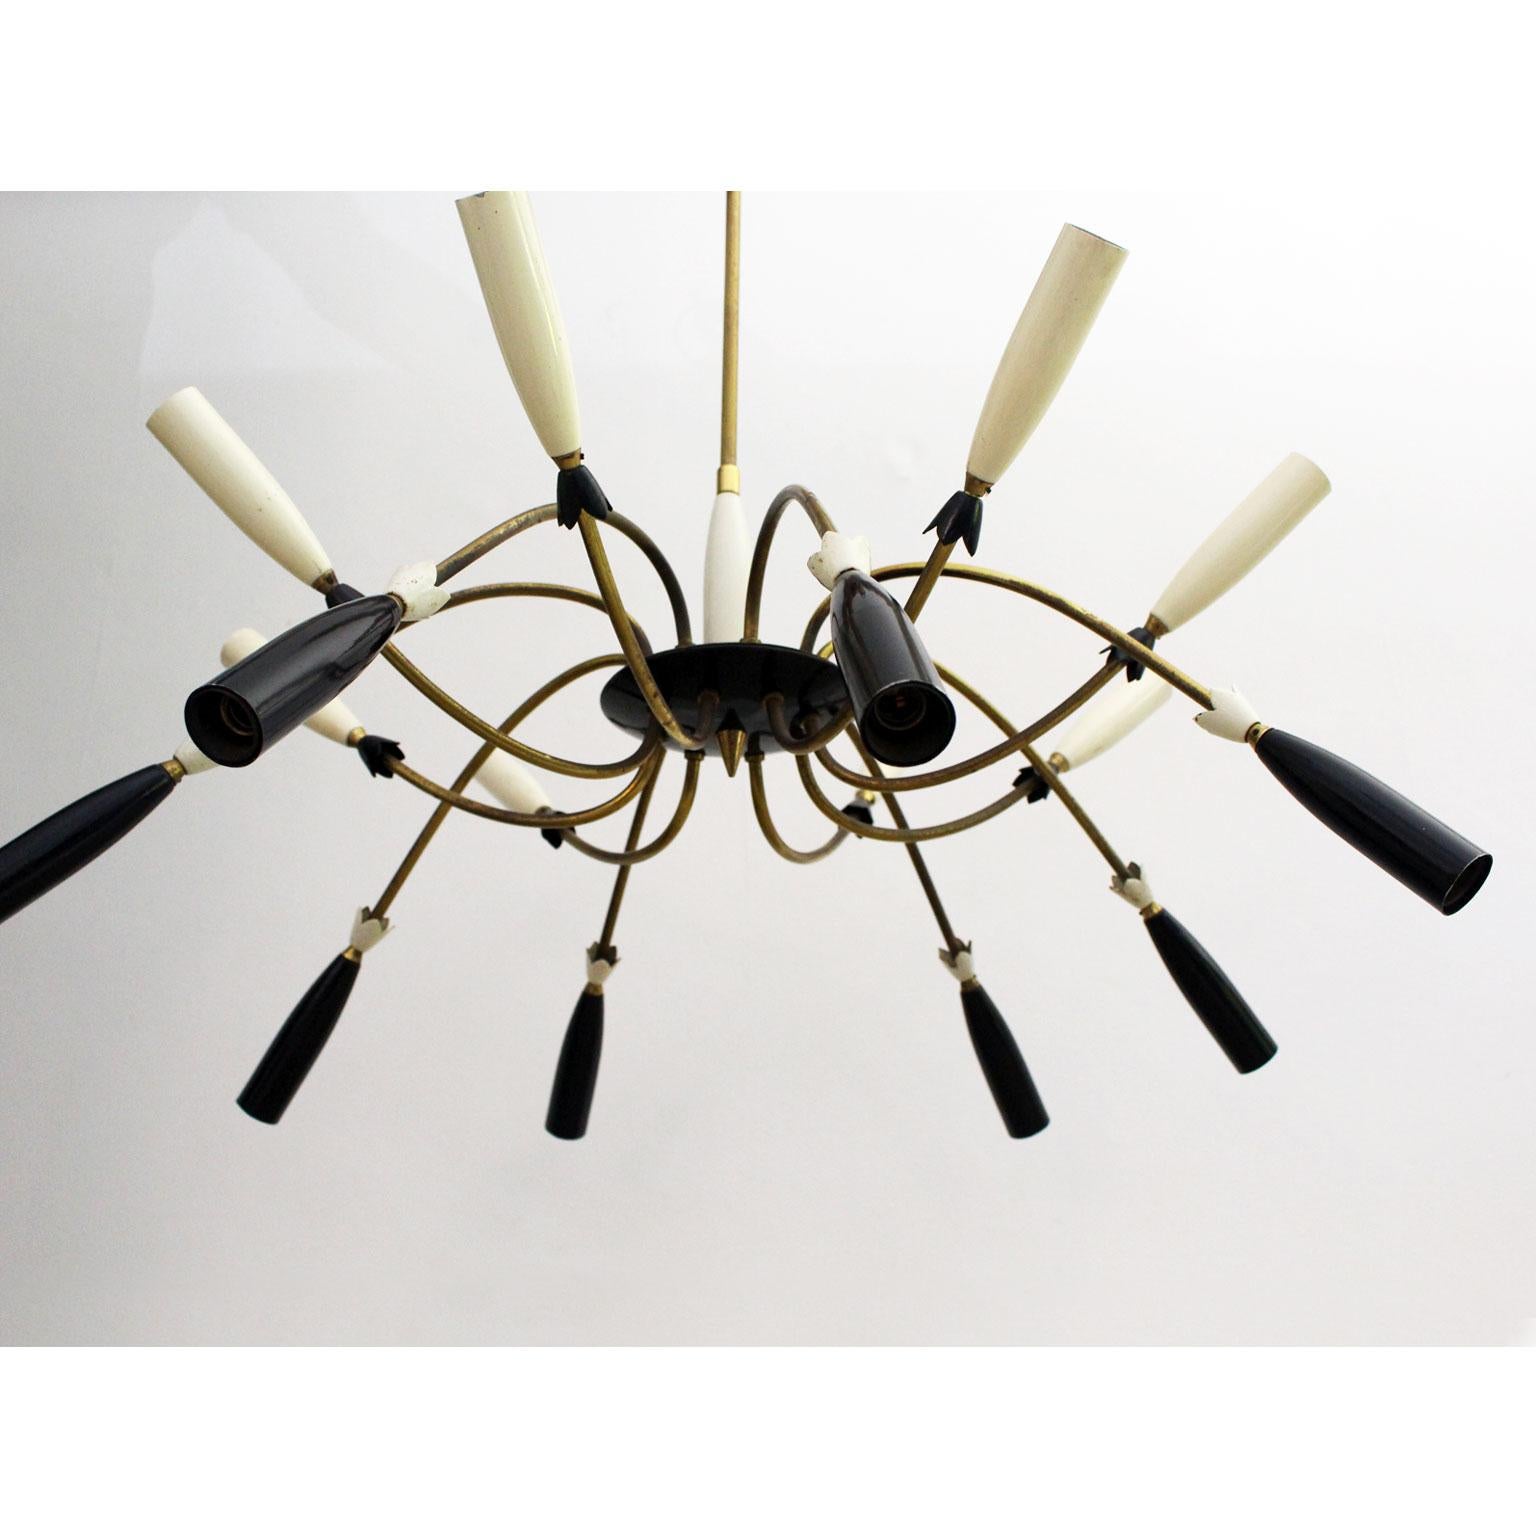 This incredibly chic Italian pendant is very much in the style of Stillovo. It comprises sixteen-light arm, eight black tipped, and eight white tipped. The arms splay out from a central brass pillar and black circular housing. Wonderful paired with